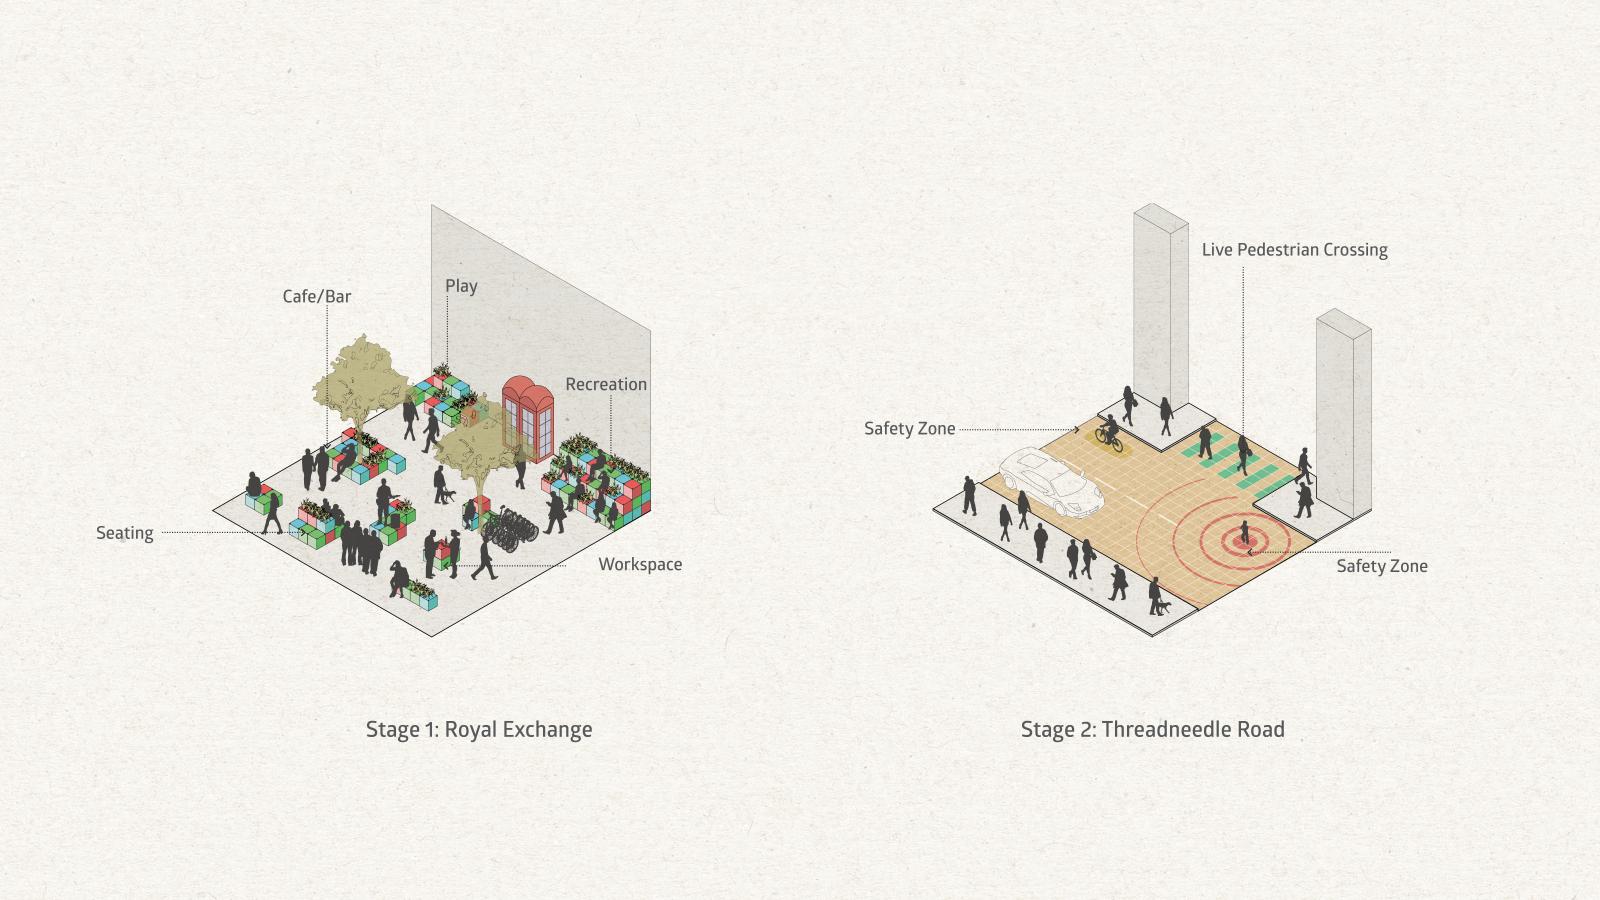 A diagram shows two stages of urban design plans. Stage 1: Royal Exchange features areas labeled Café/Bar, Seating, Play, Recreation, Workspace. Stage 2: Threadneedle Road incorporates smart carpet technology in areas labeled Live Pedestrian Crossing and Safety Zone.